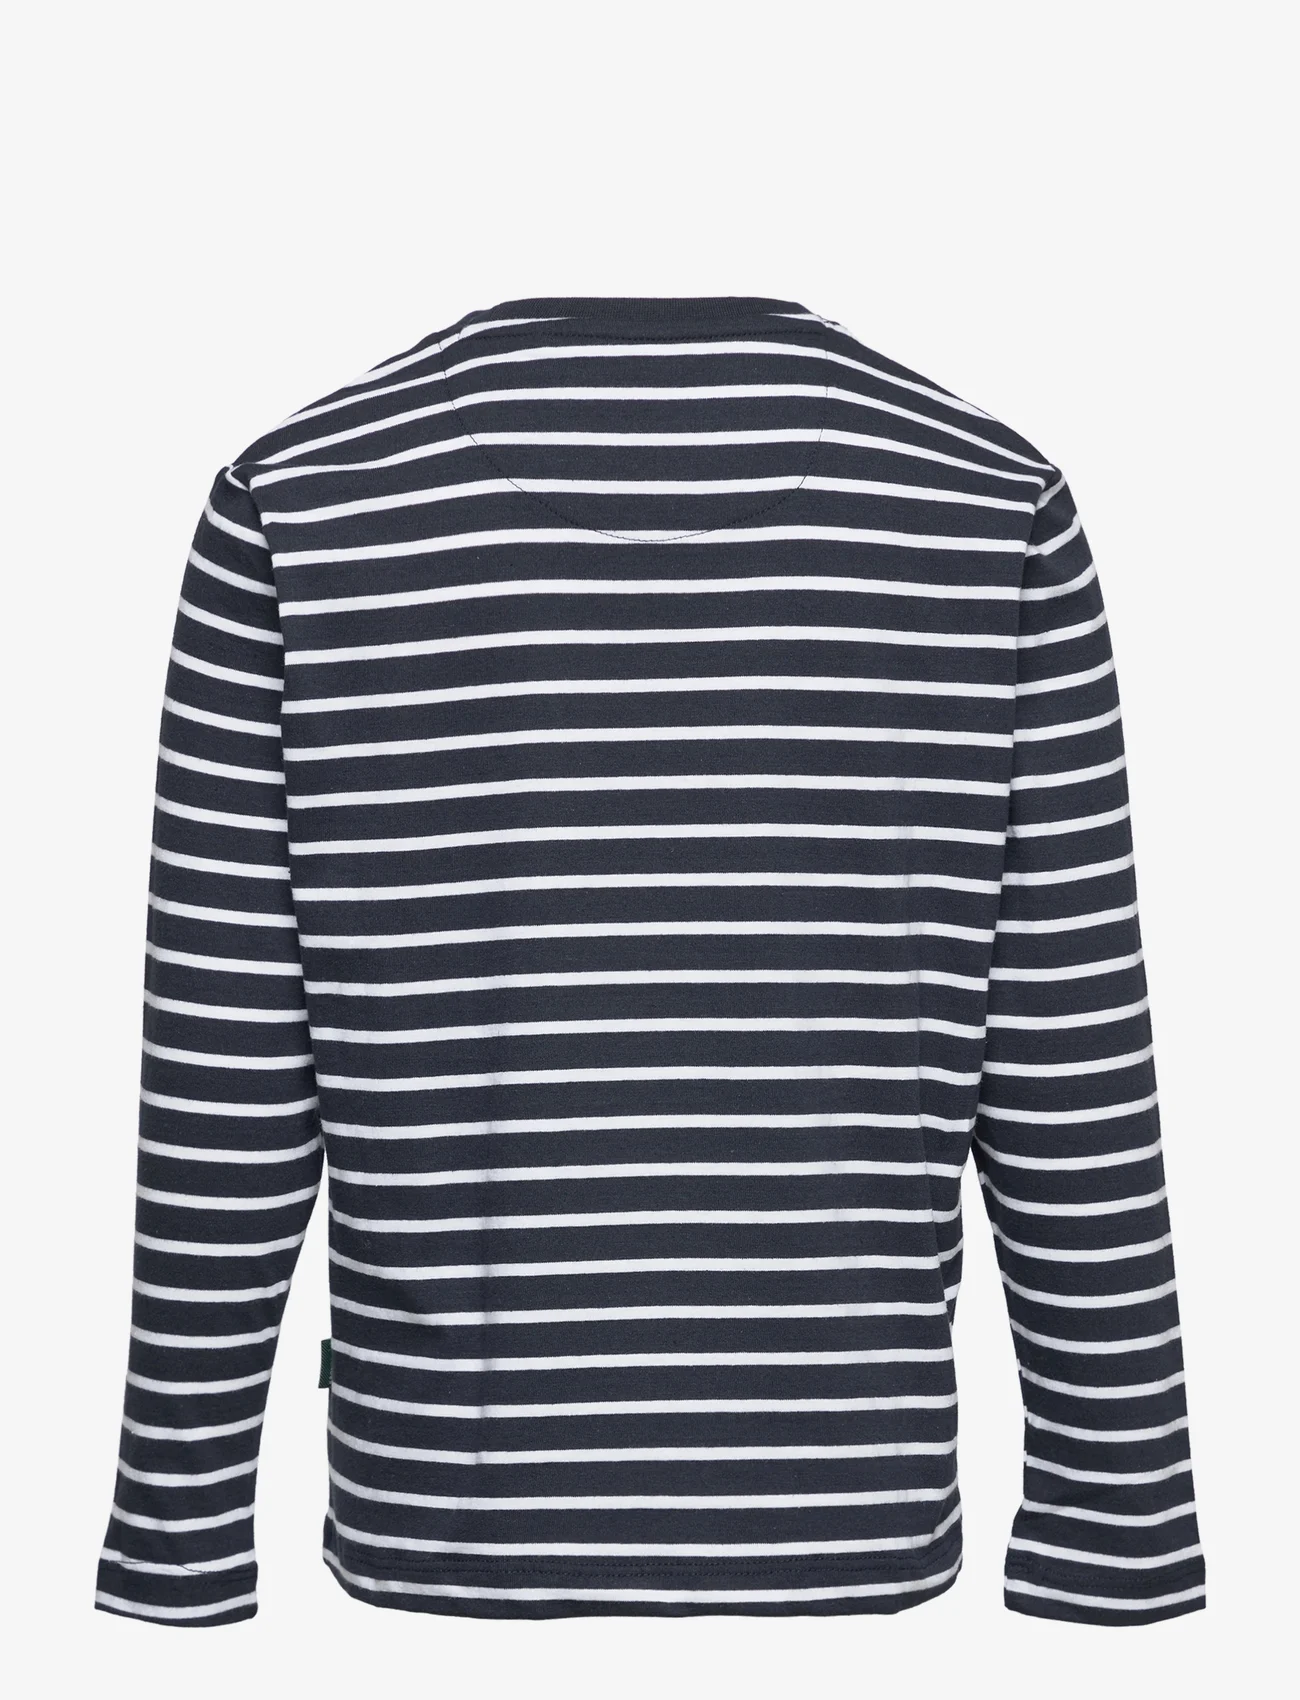 Kronstadt - Timmi Kids Organic/Recycled L/S stripe tee - long-sleeved t-shirts - navy / white - 1